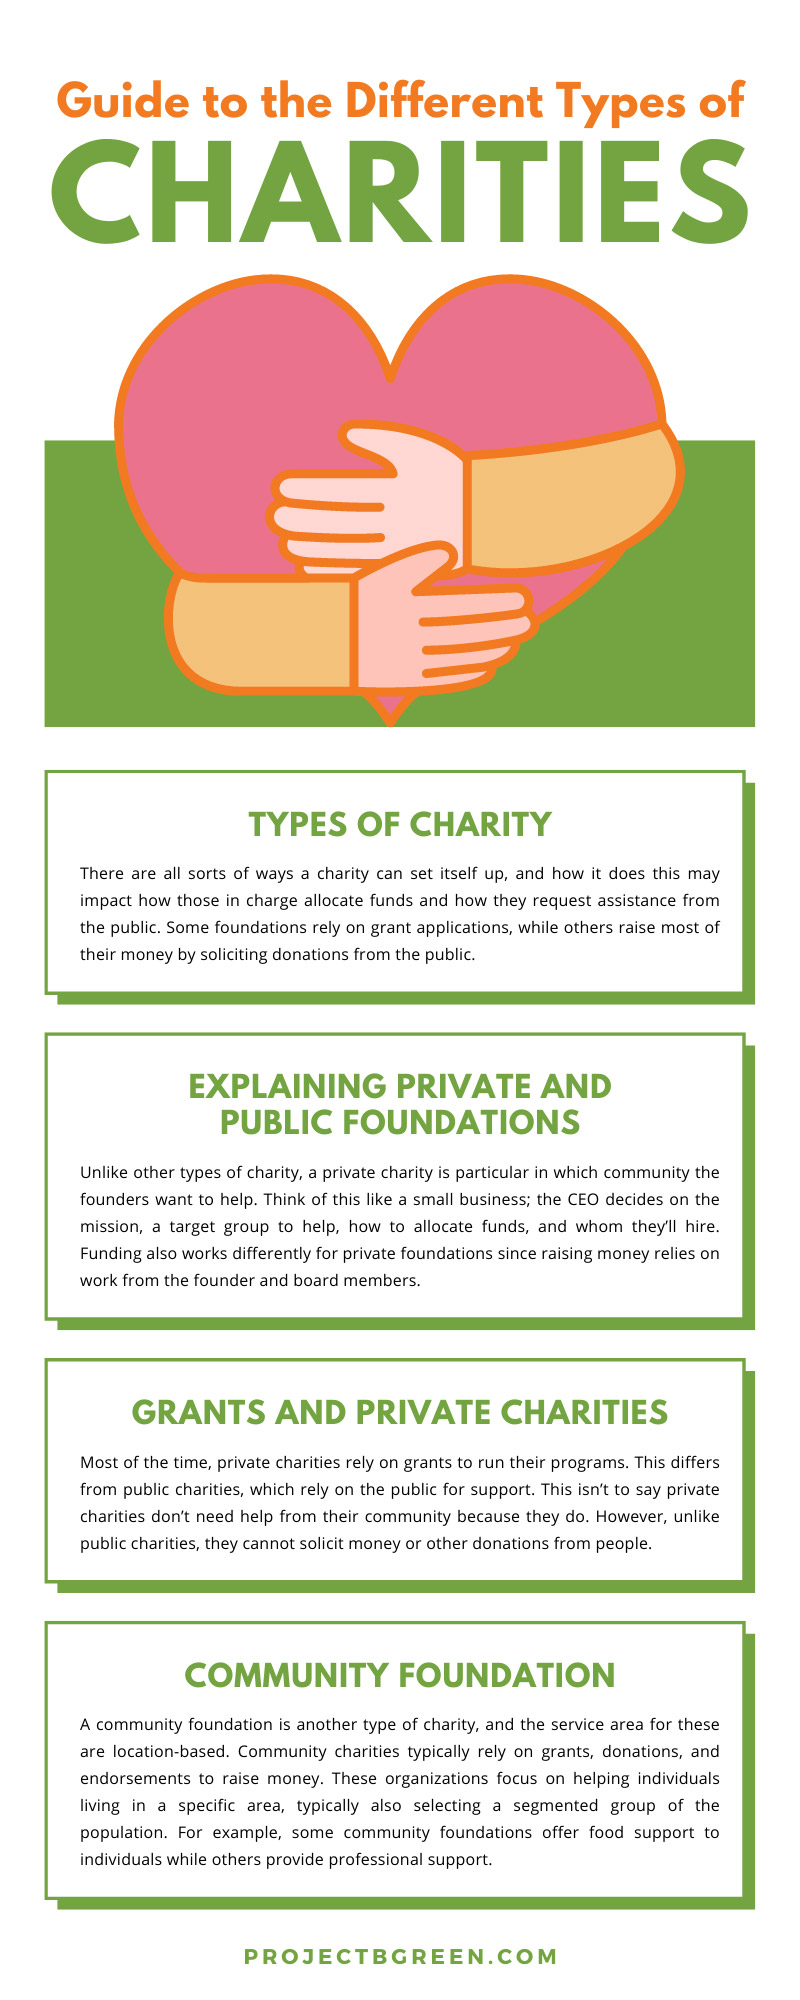 Guide to the Different Types of Charities